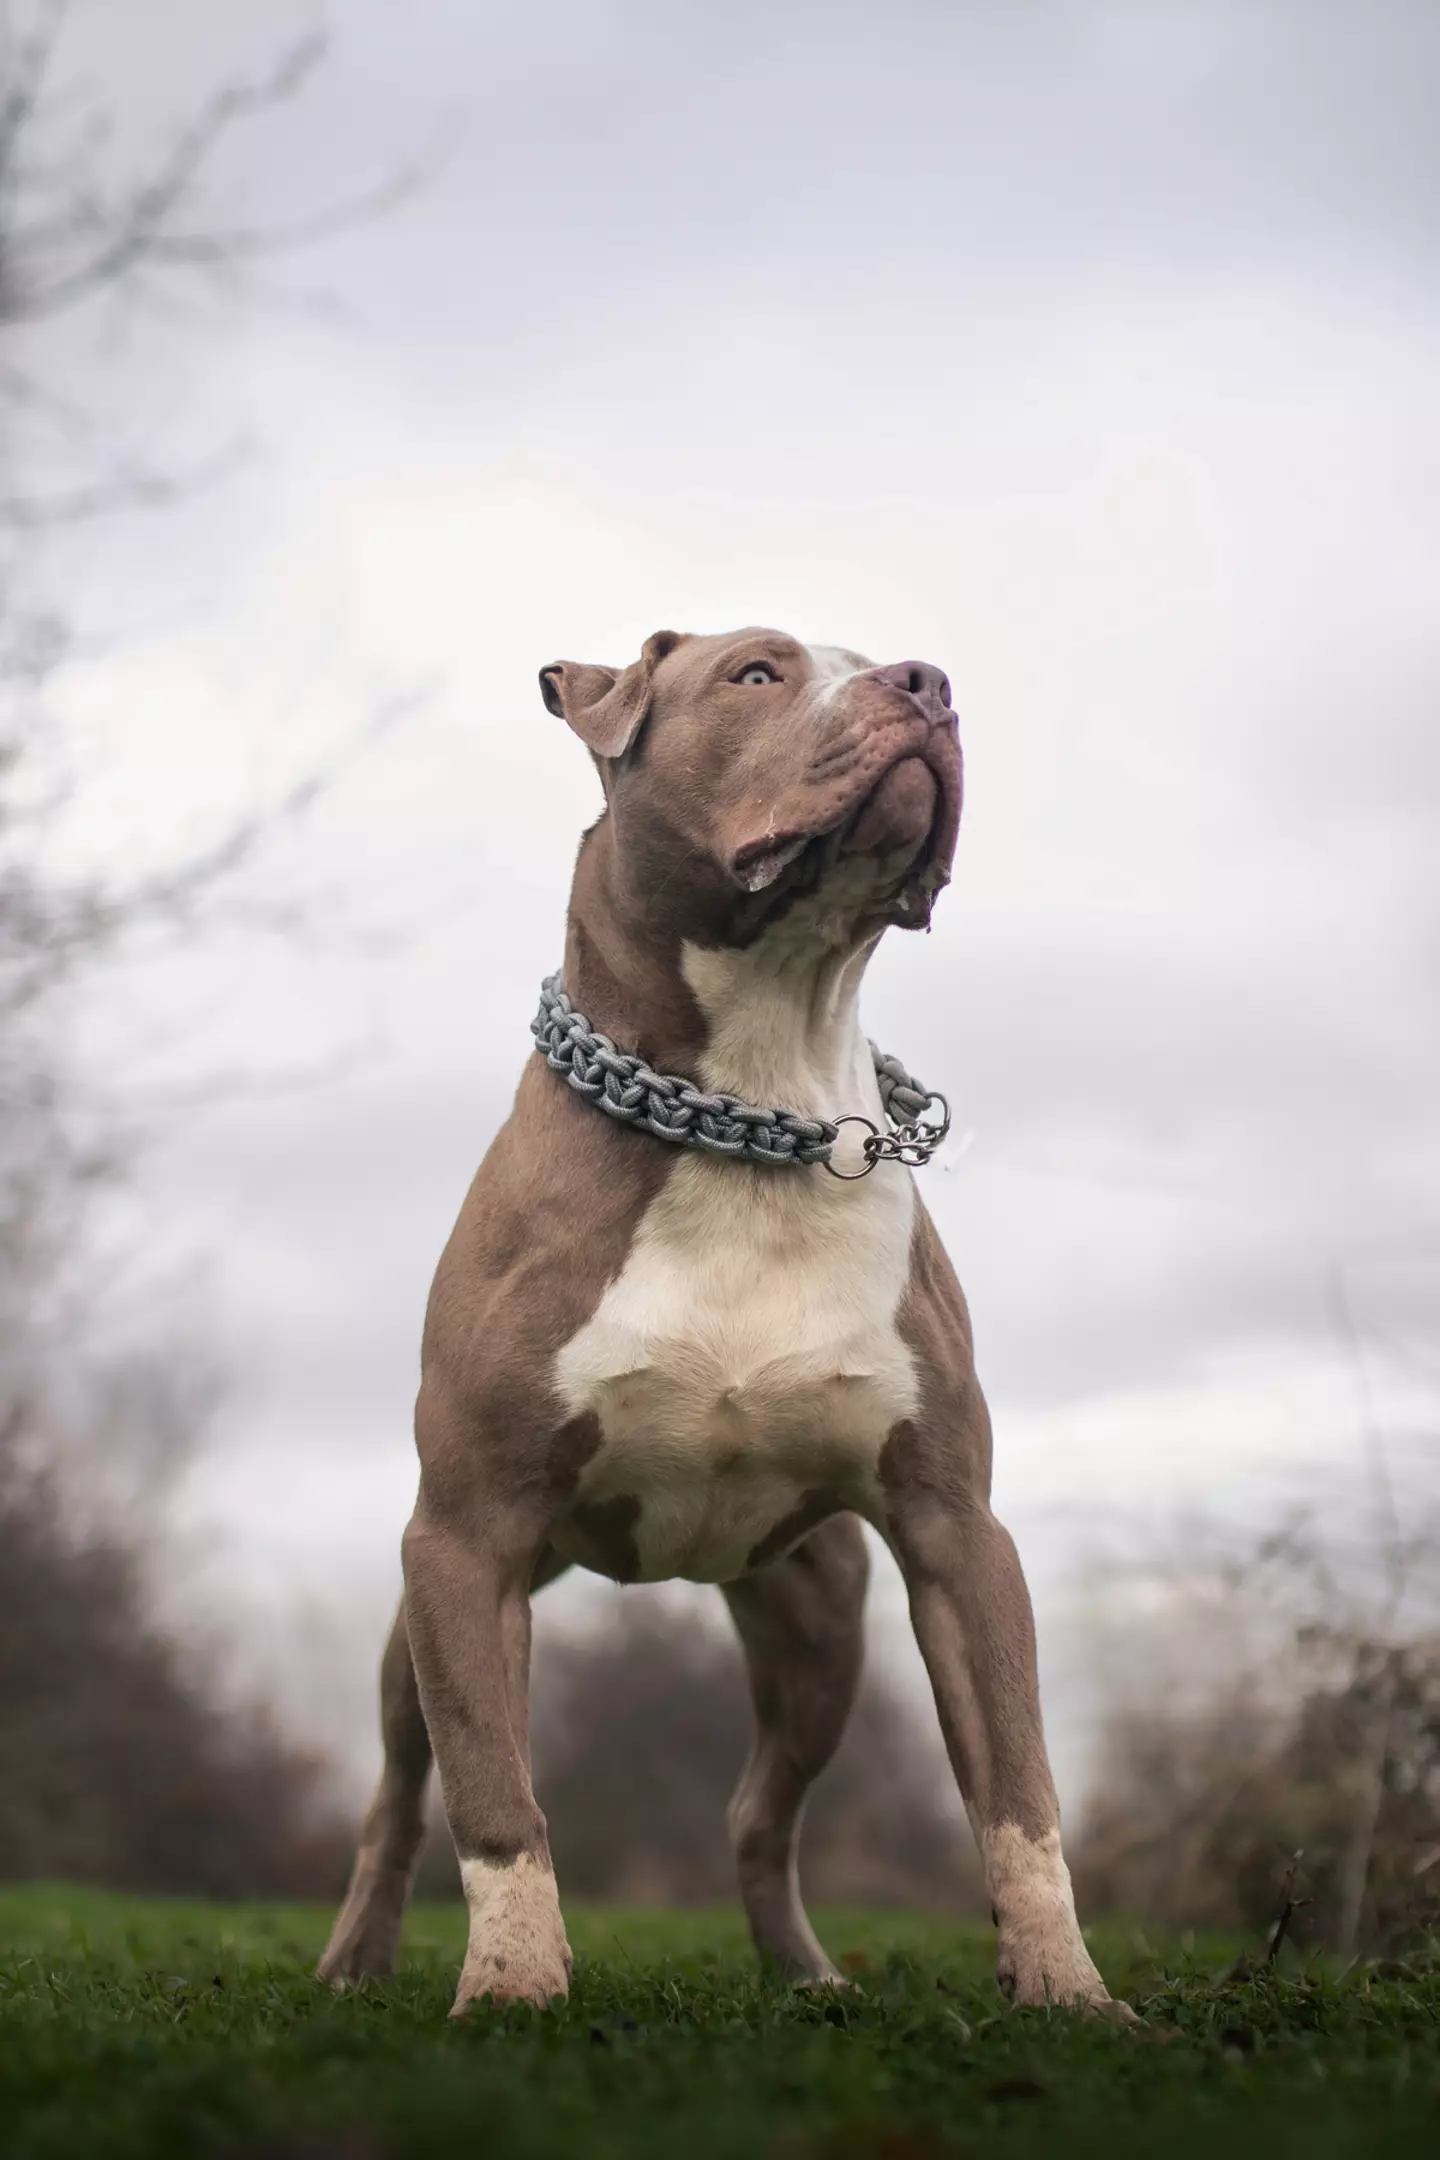 Under new legal restrictions, it is now illegal to sell, gift, exchange, breed or abandon XL Bully dogs.